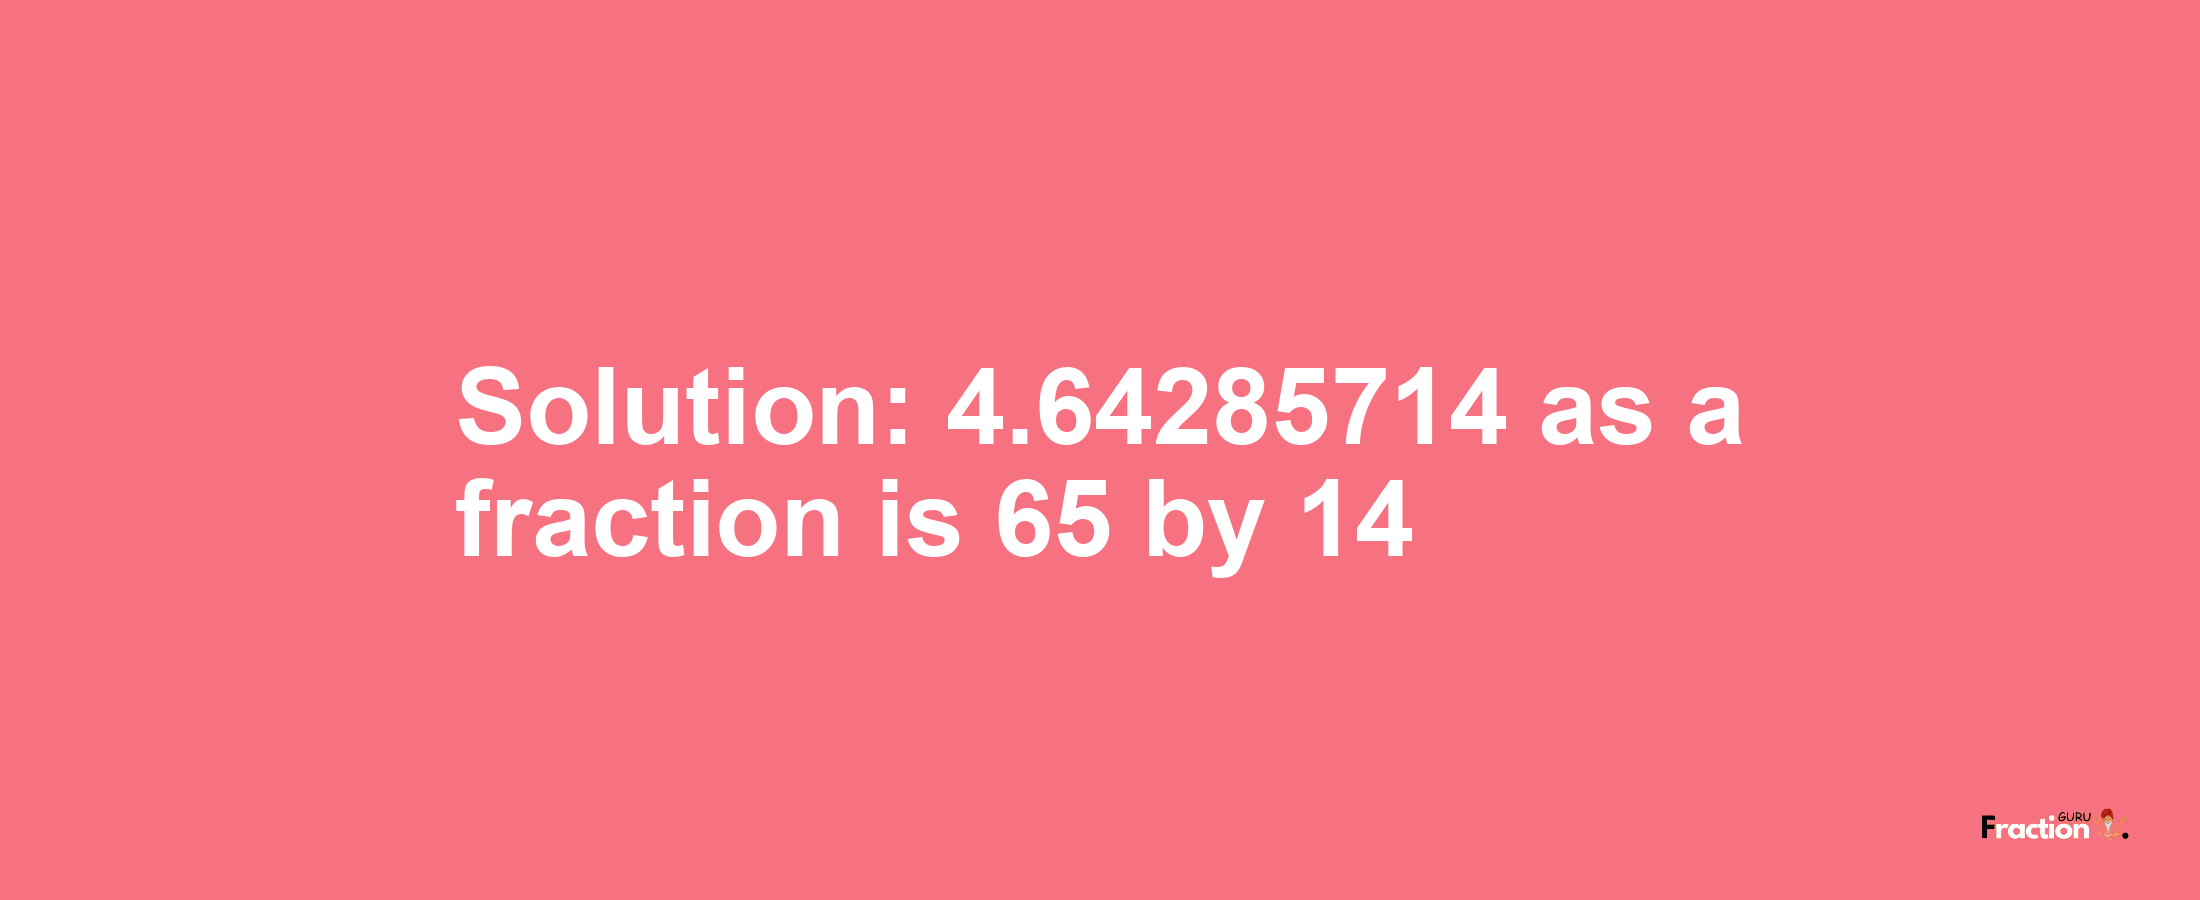 Solution:4.64285714 as a fraction is 65/14